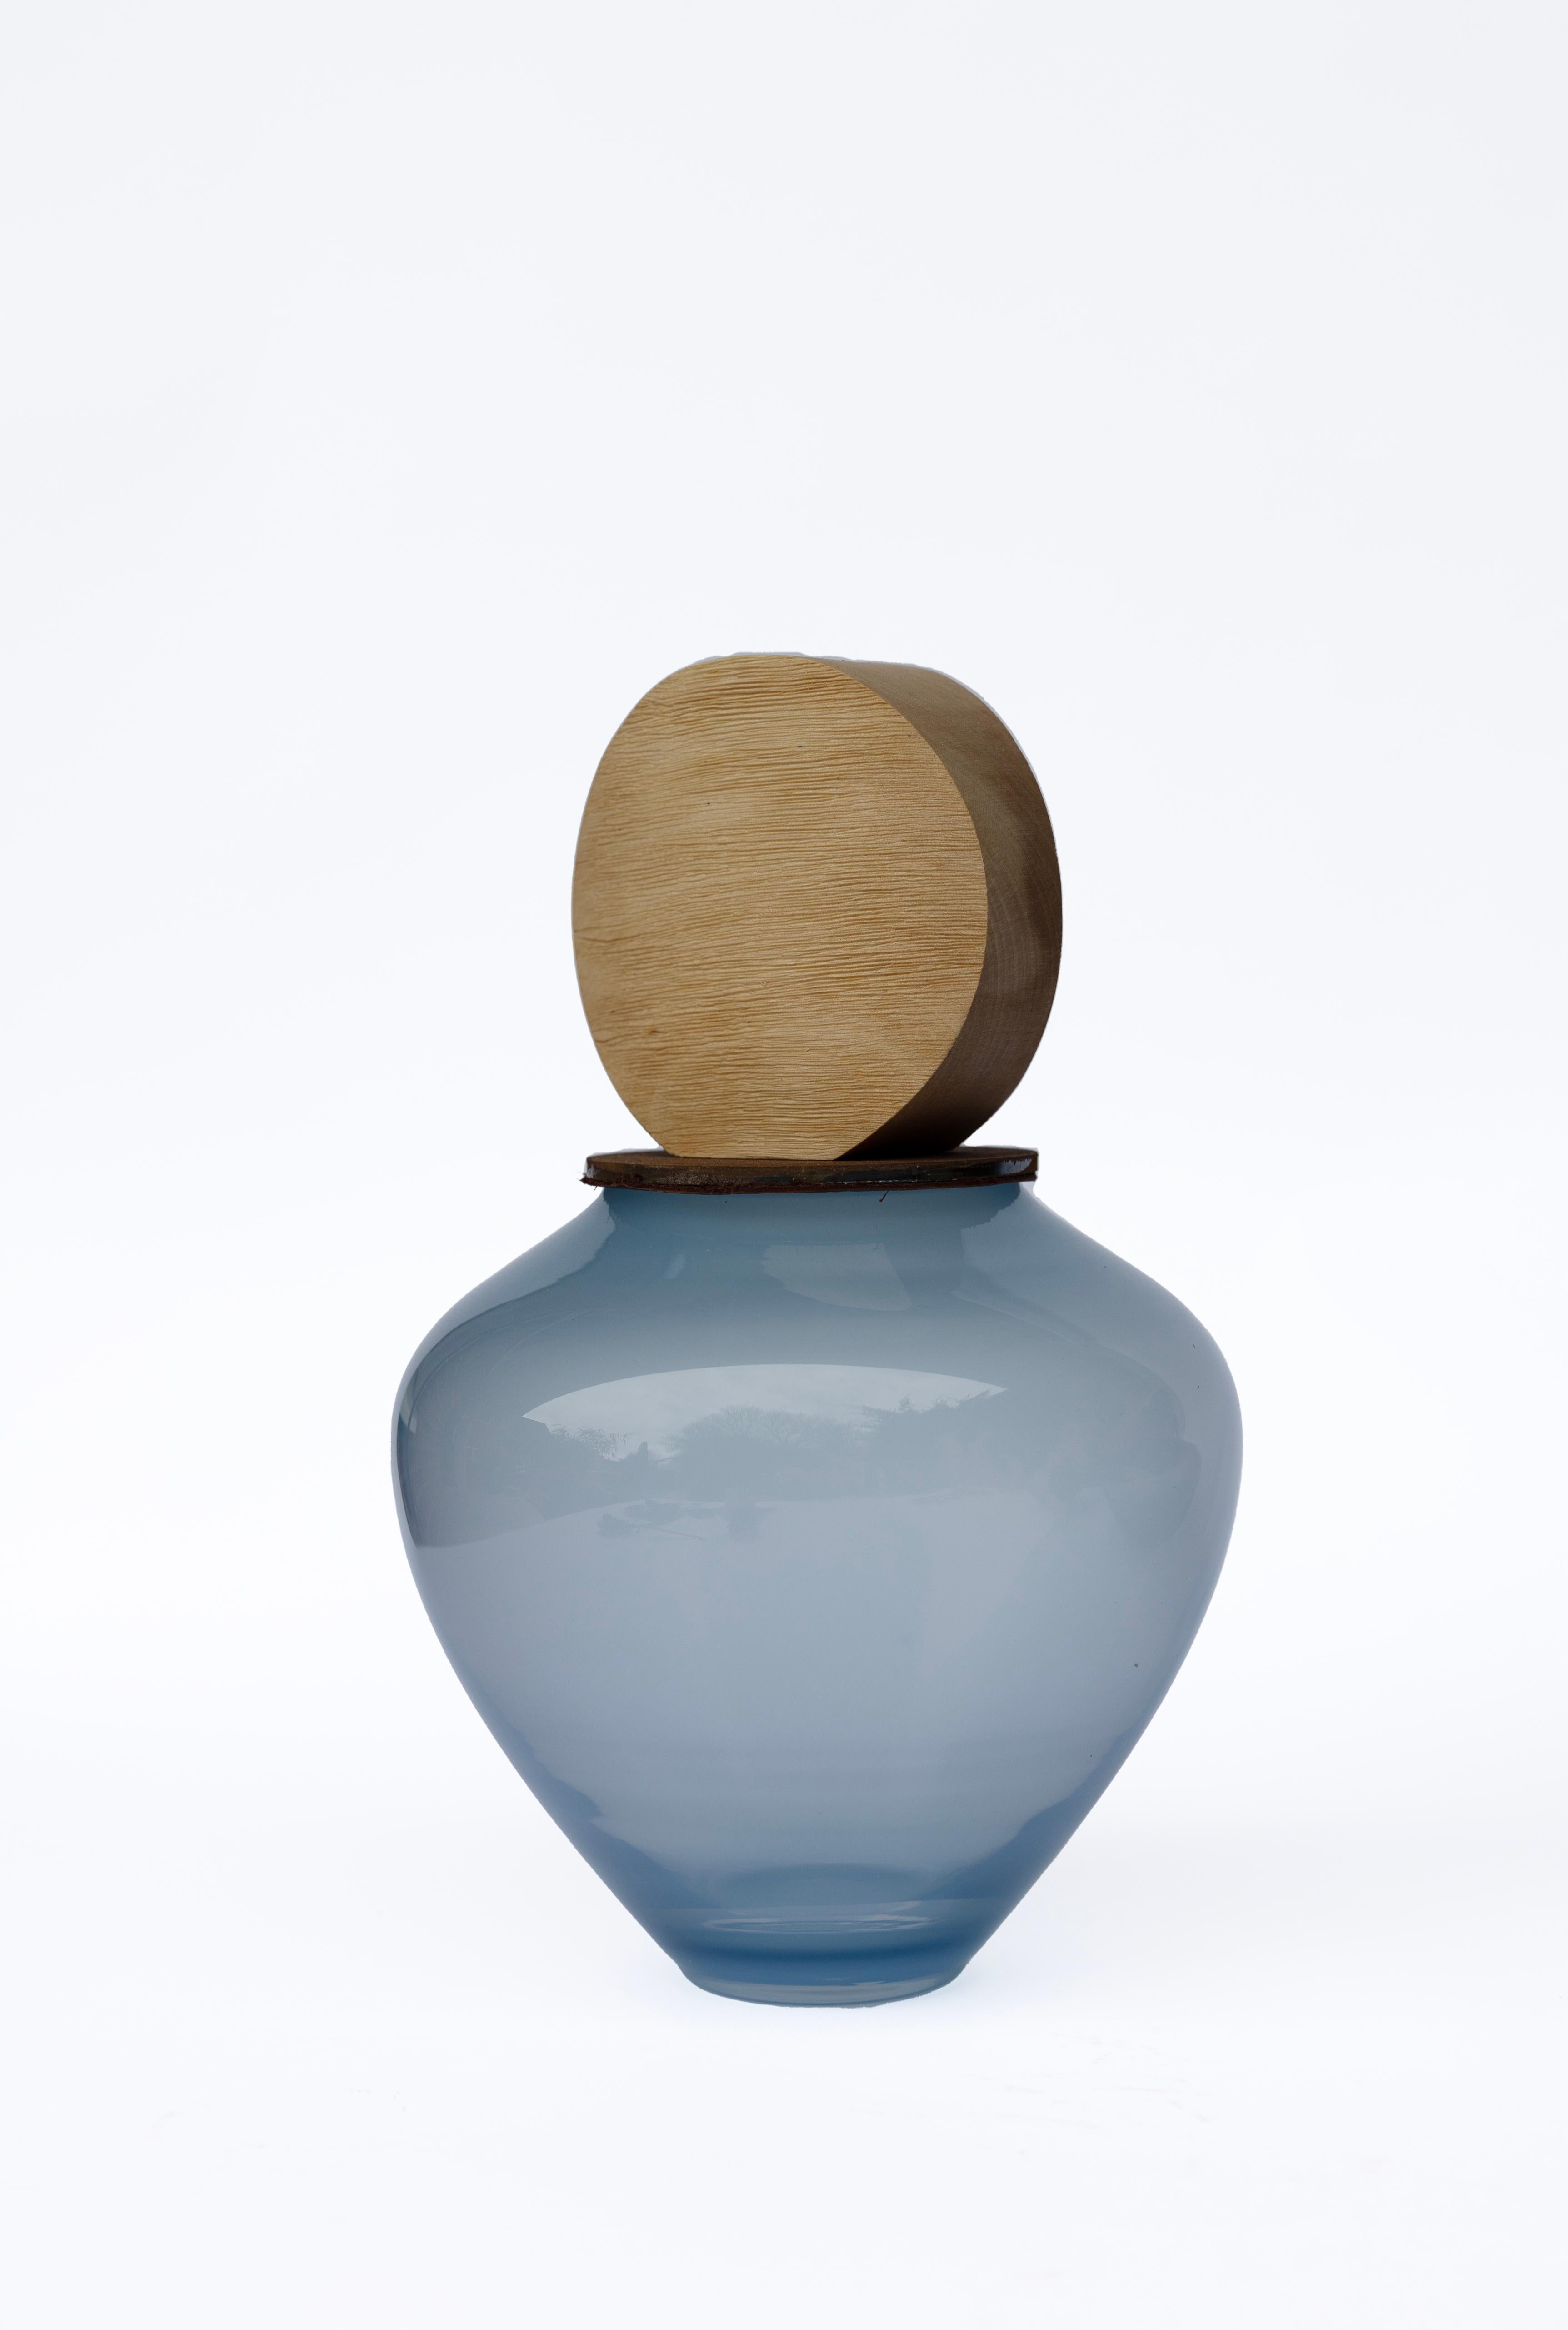 Ohana Stacking Pigeon Blue S & Triangle Vessel by Pia Wüstenberg
Unique Piece. Handmade In Europe.
Dimensions: Ø 19 x H 25 cm.
Materials: Handblown glass, ceramic and wood.

Available in different color options. Dimensions are approximate, due to